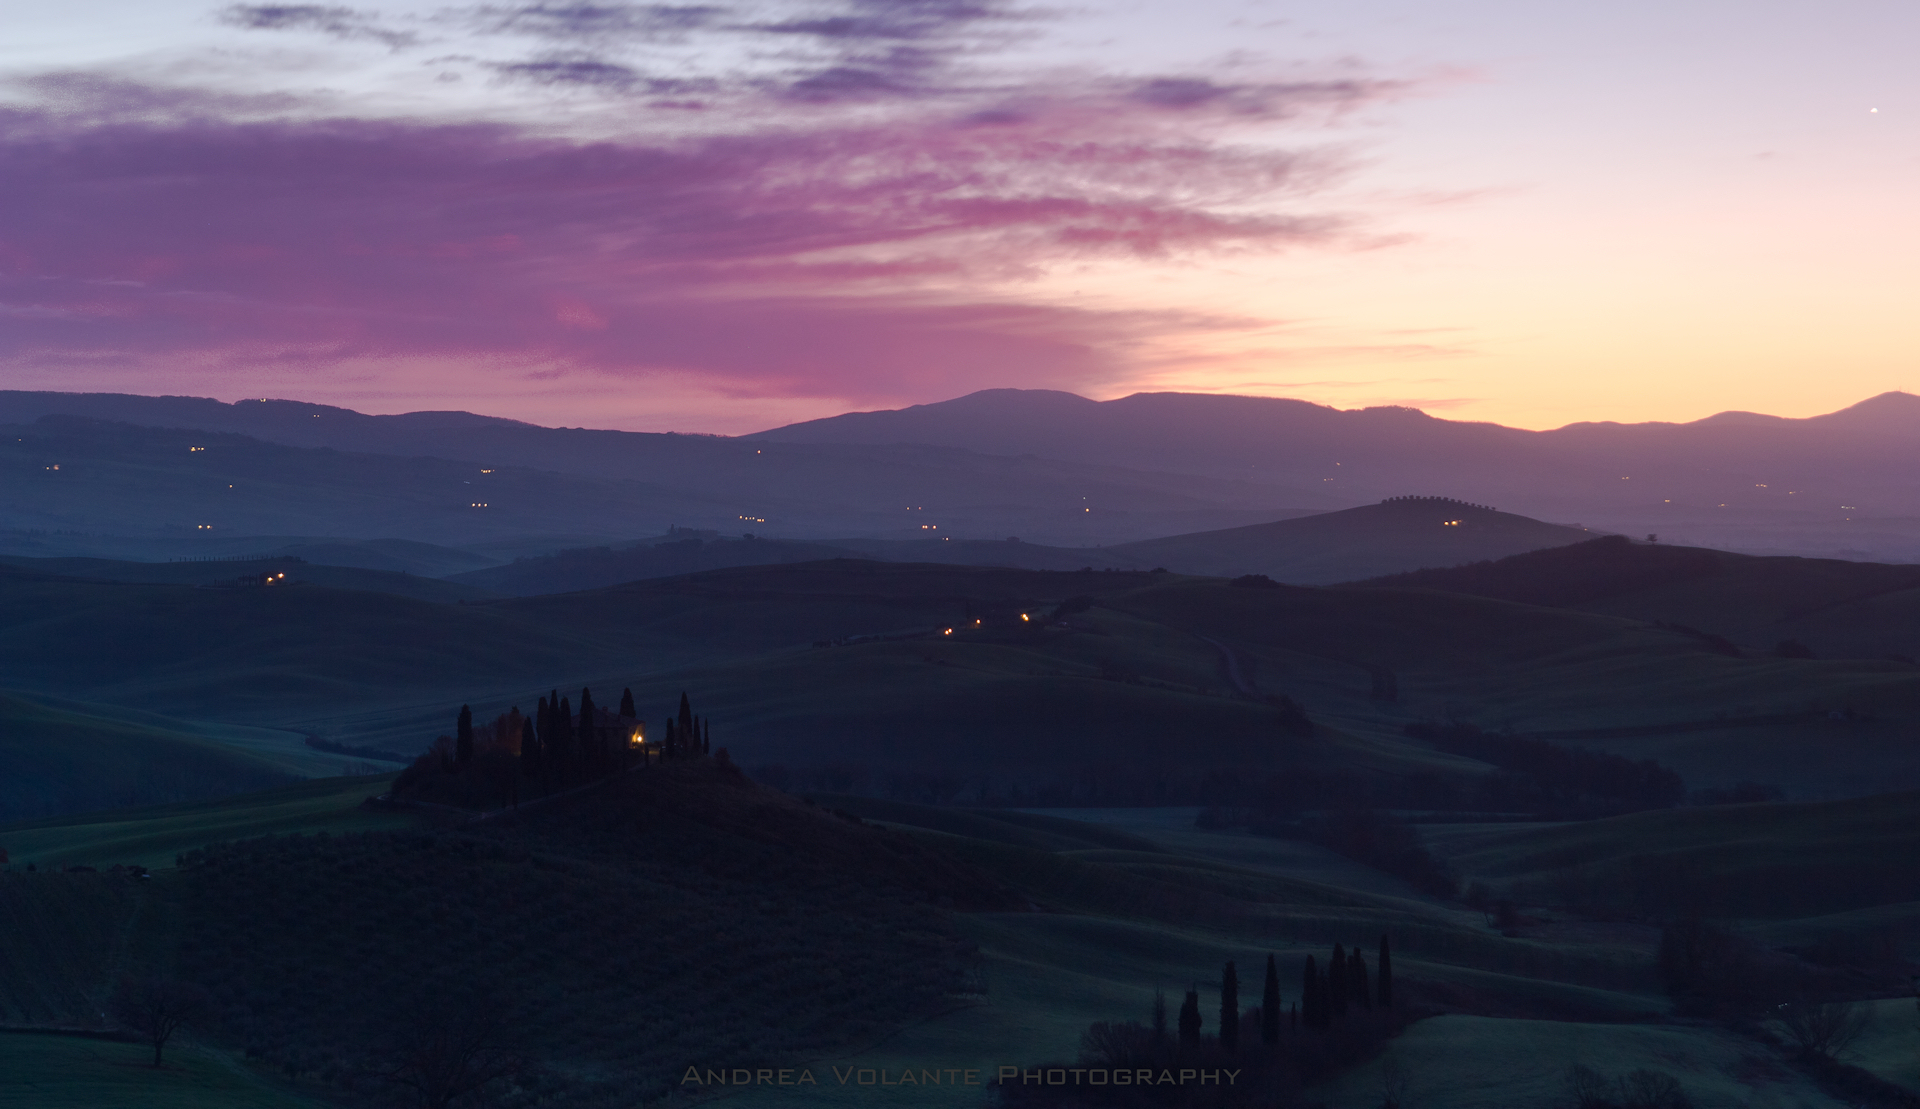 The lights of the new day on earth d'Orcia....